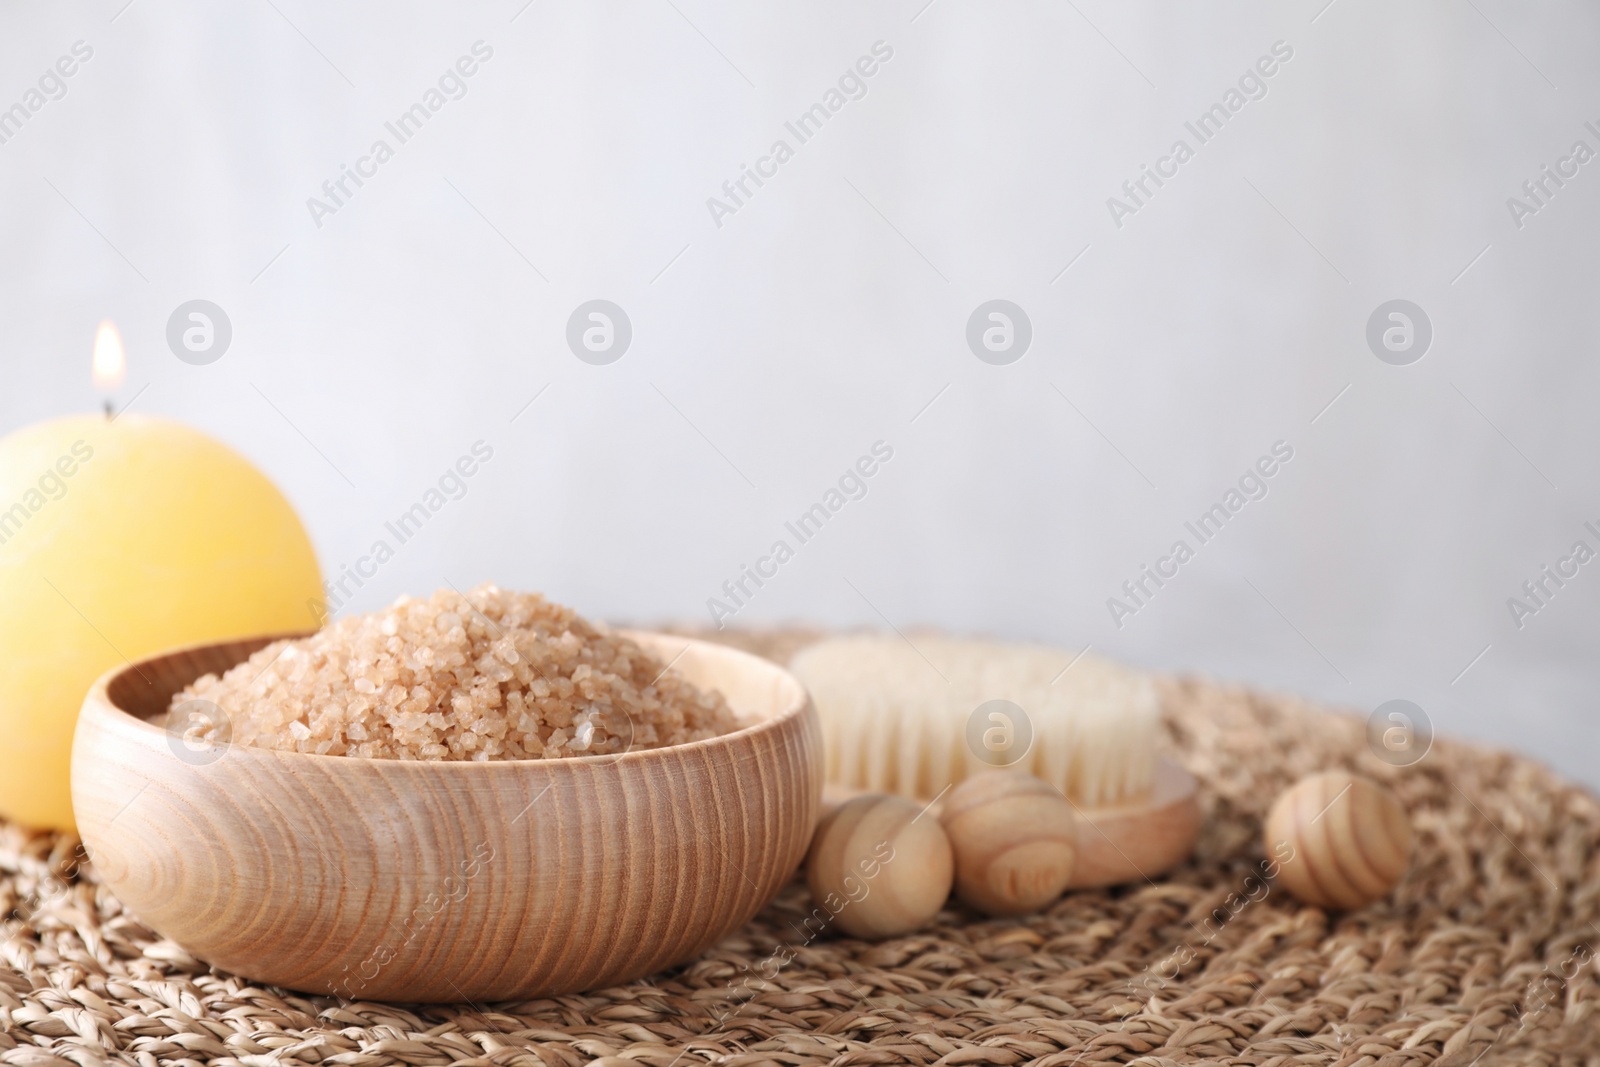 Photo of Salt for spa scrubbing procedure and wooden balls on table against grey background